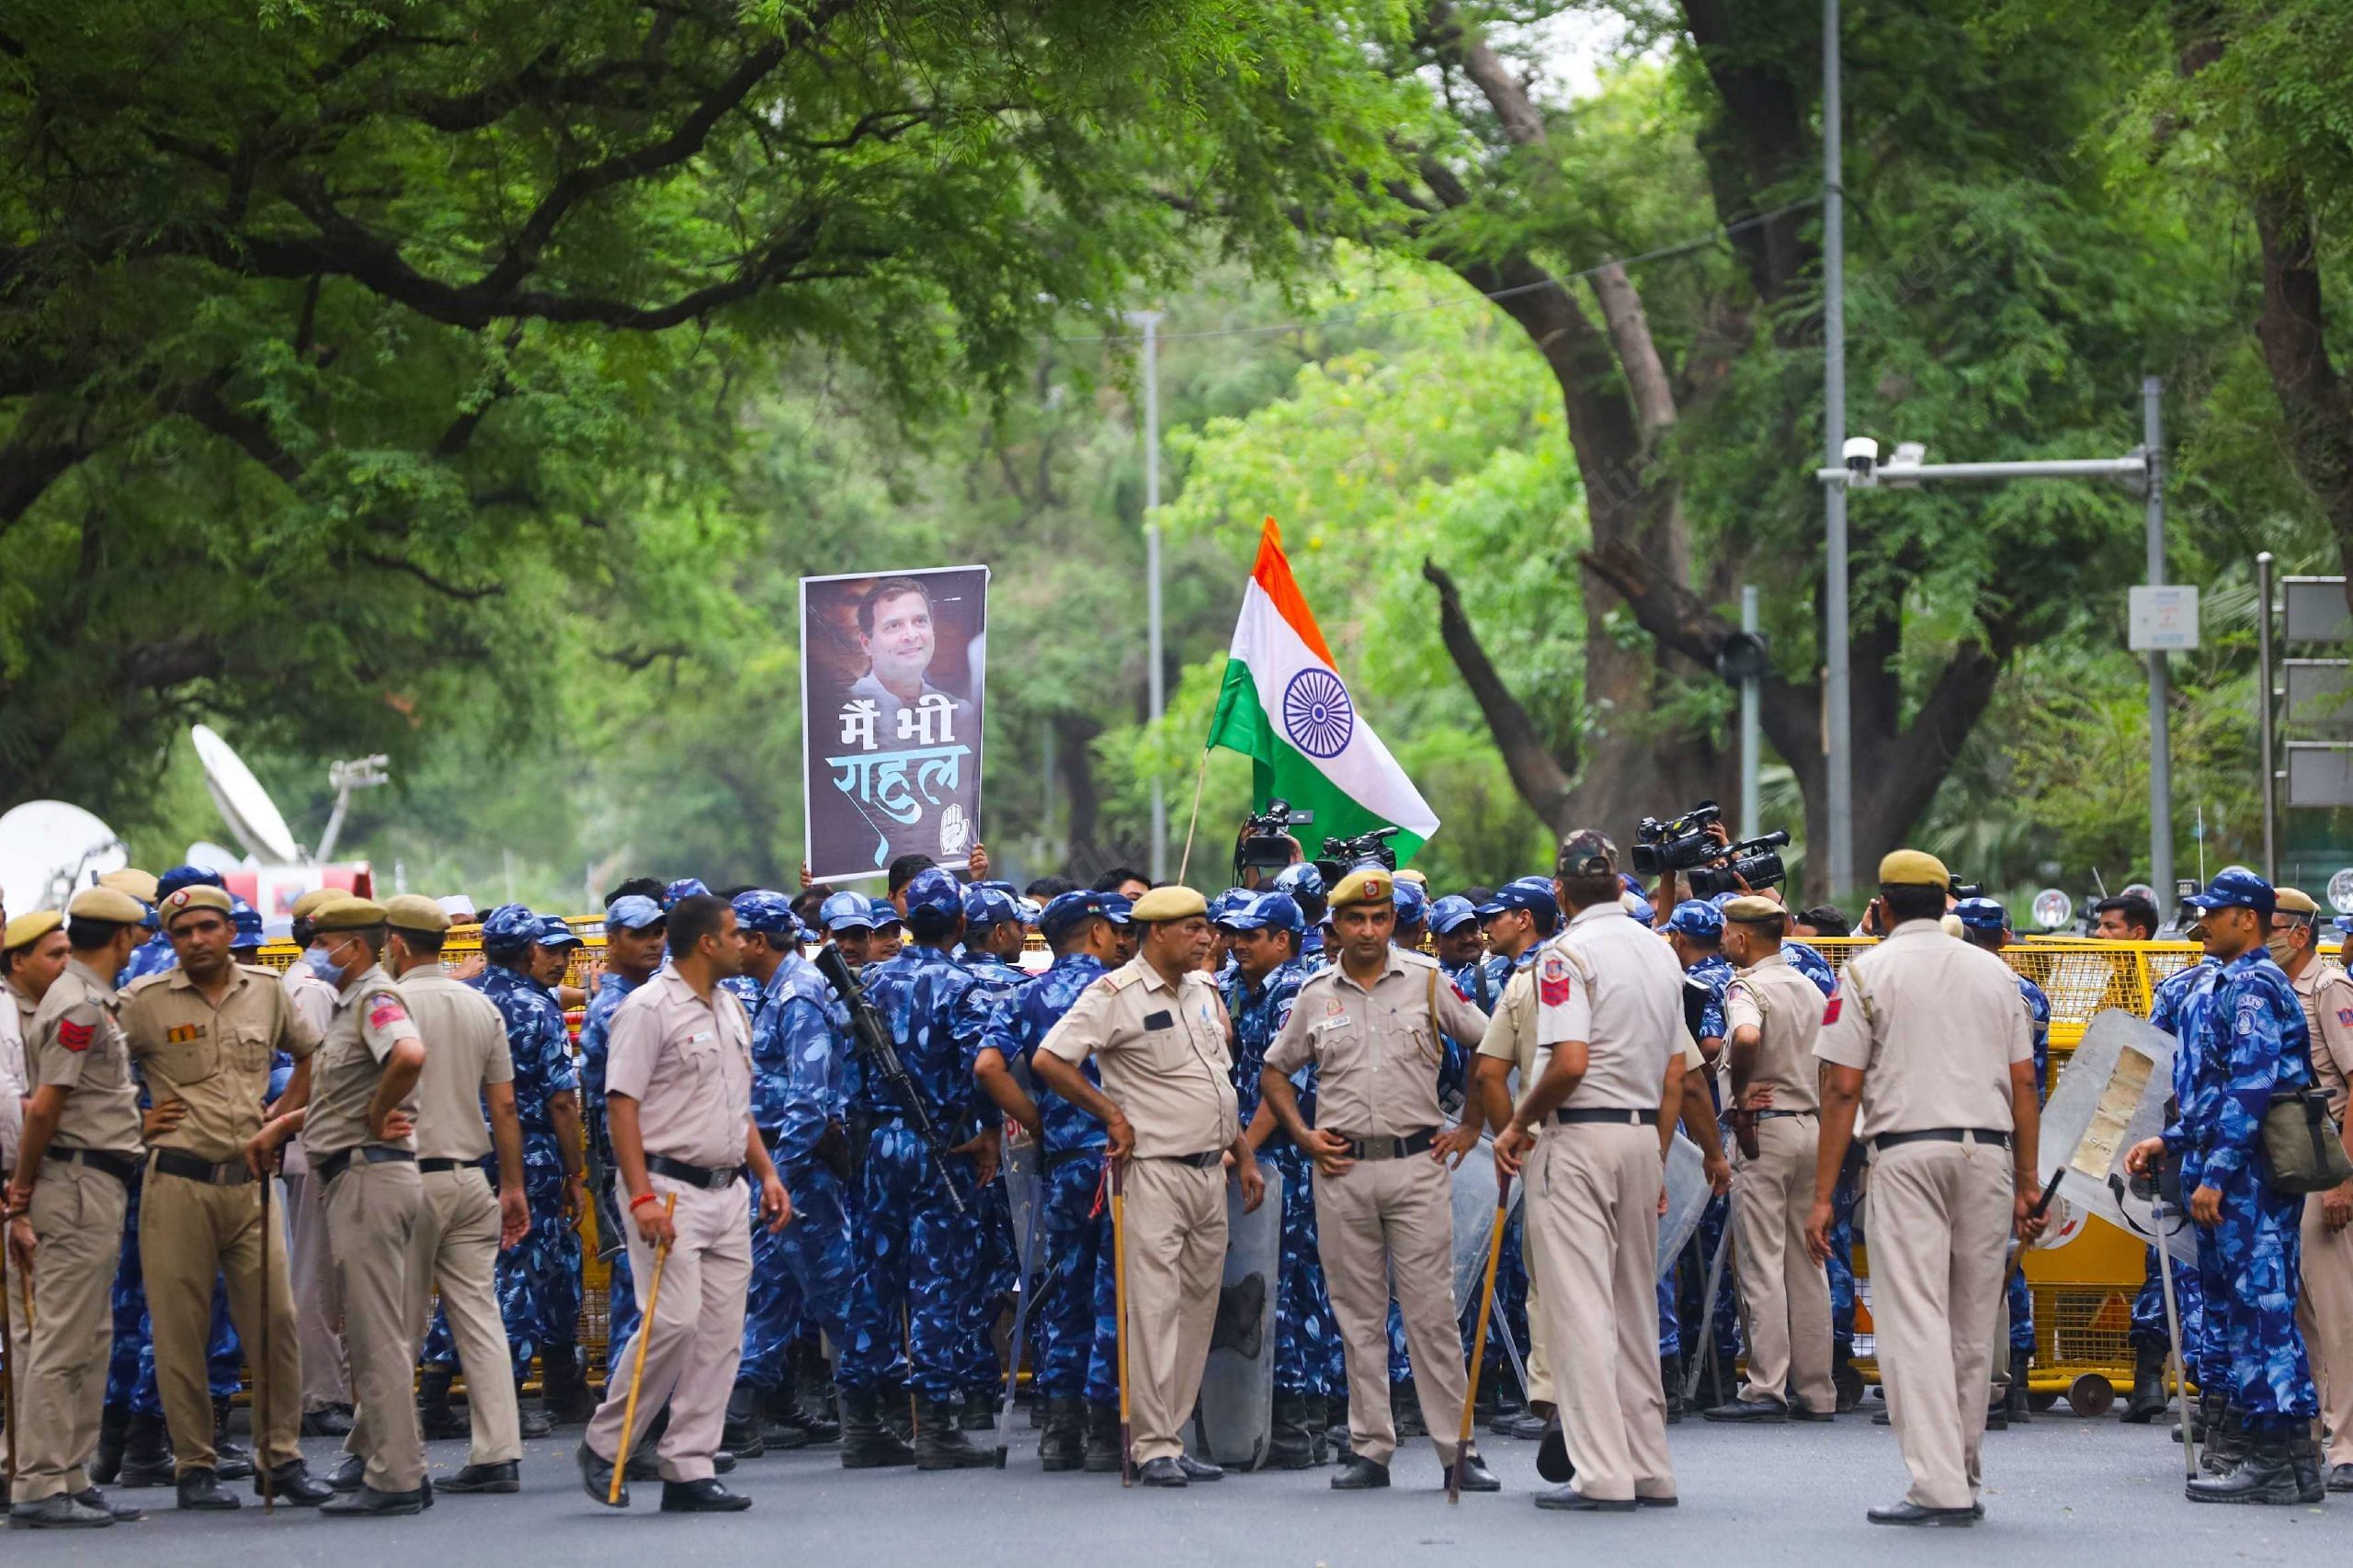 Police at the All India Congress Committee headquarters in New Delhi on 13 June | Manisha Mondal | ThePrint